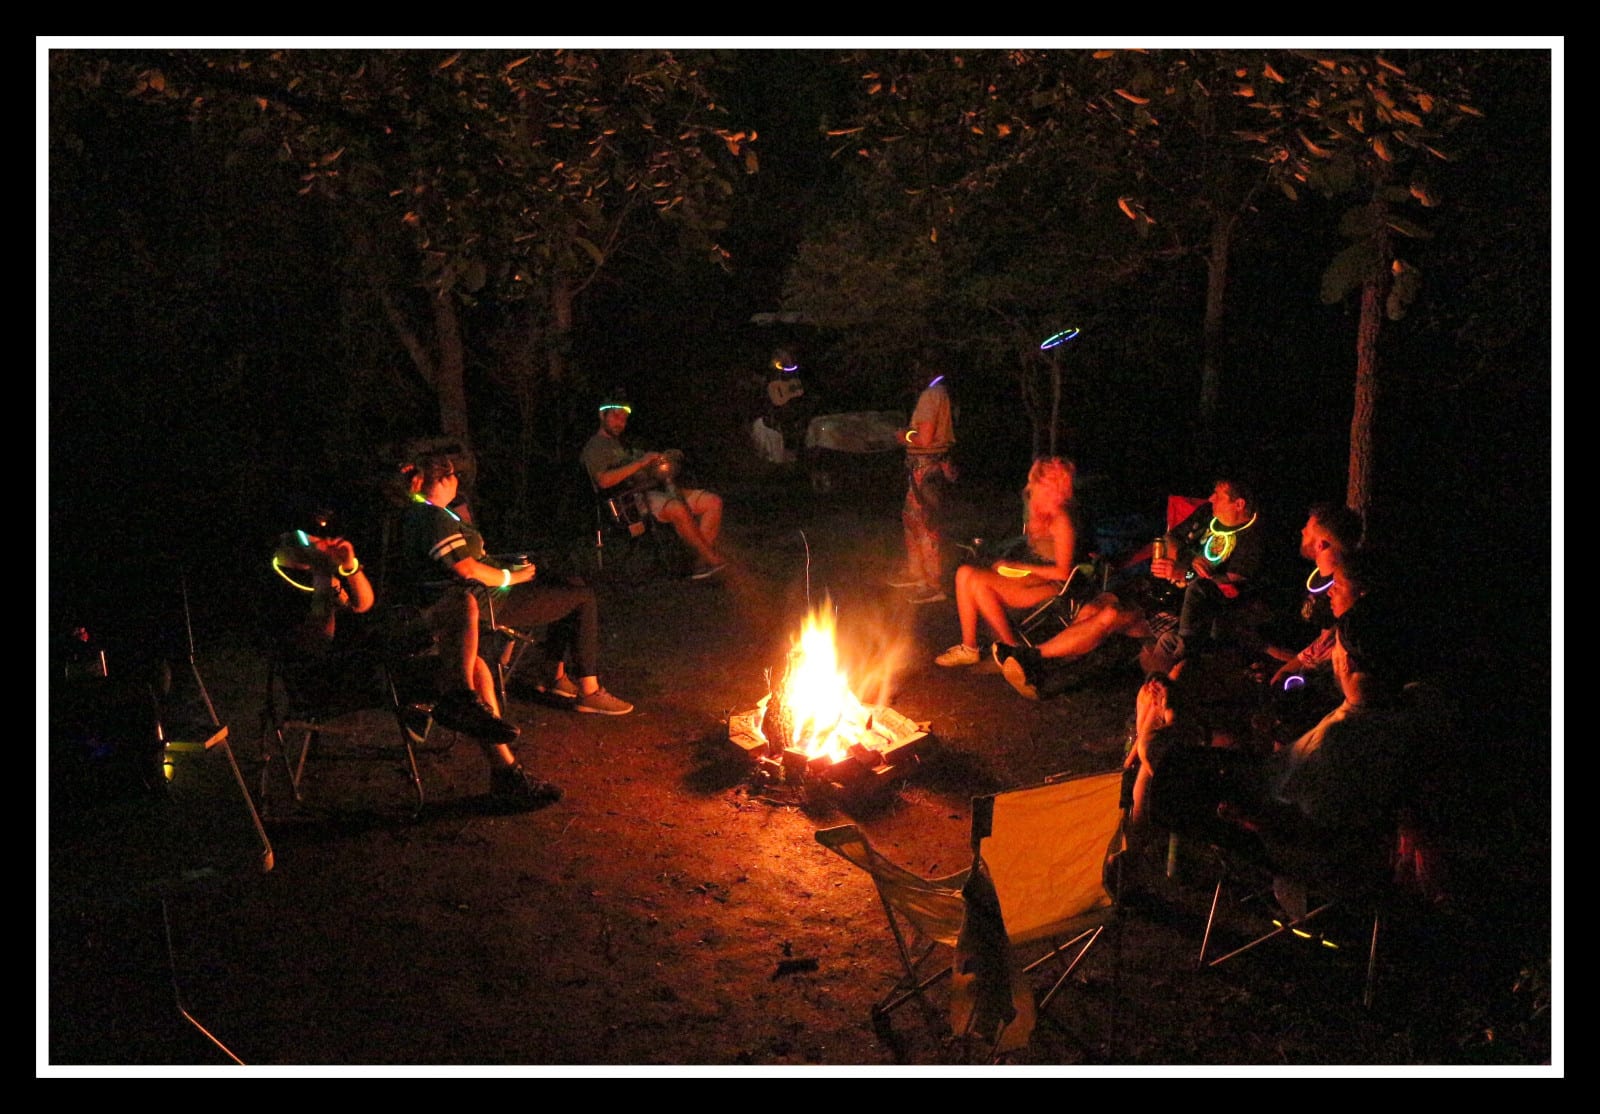 Hollis & her ukulele perform after dark at your campfire from her golf cart stage!